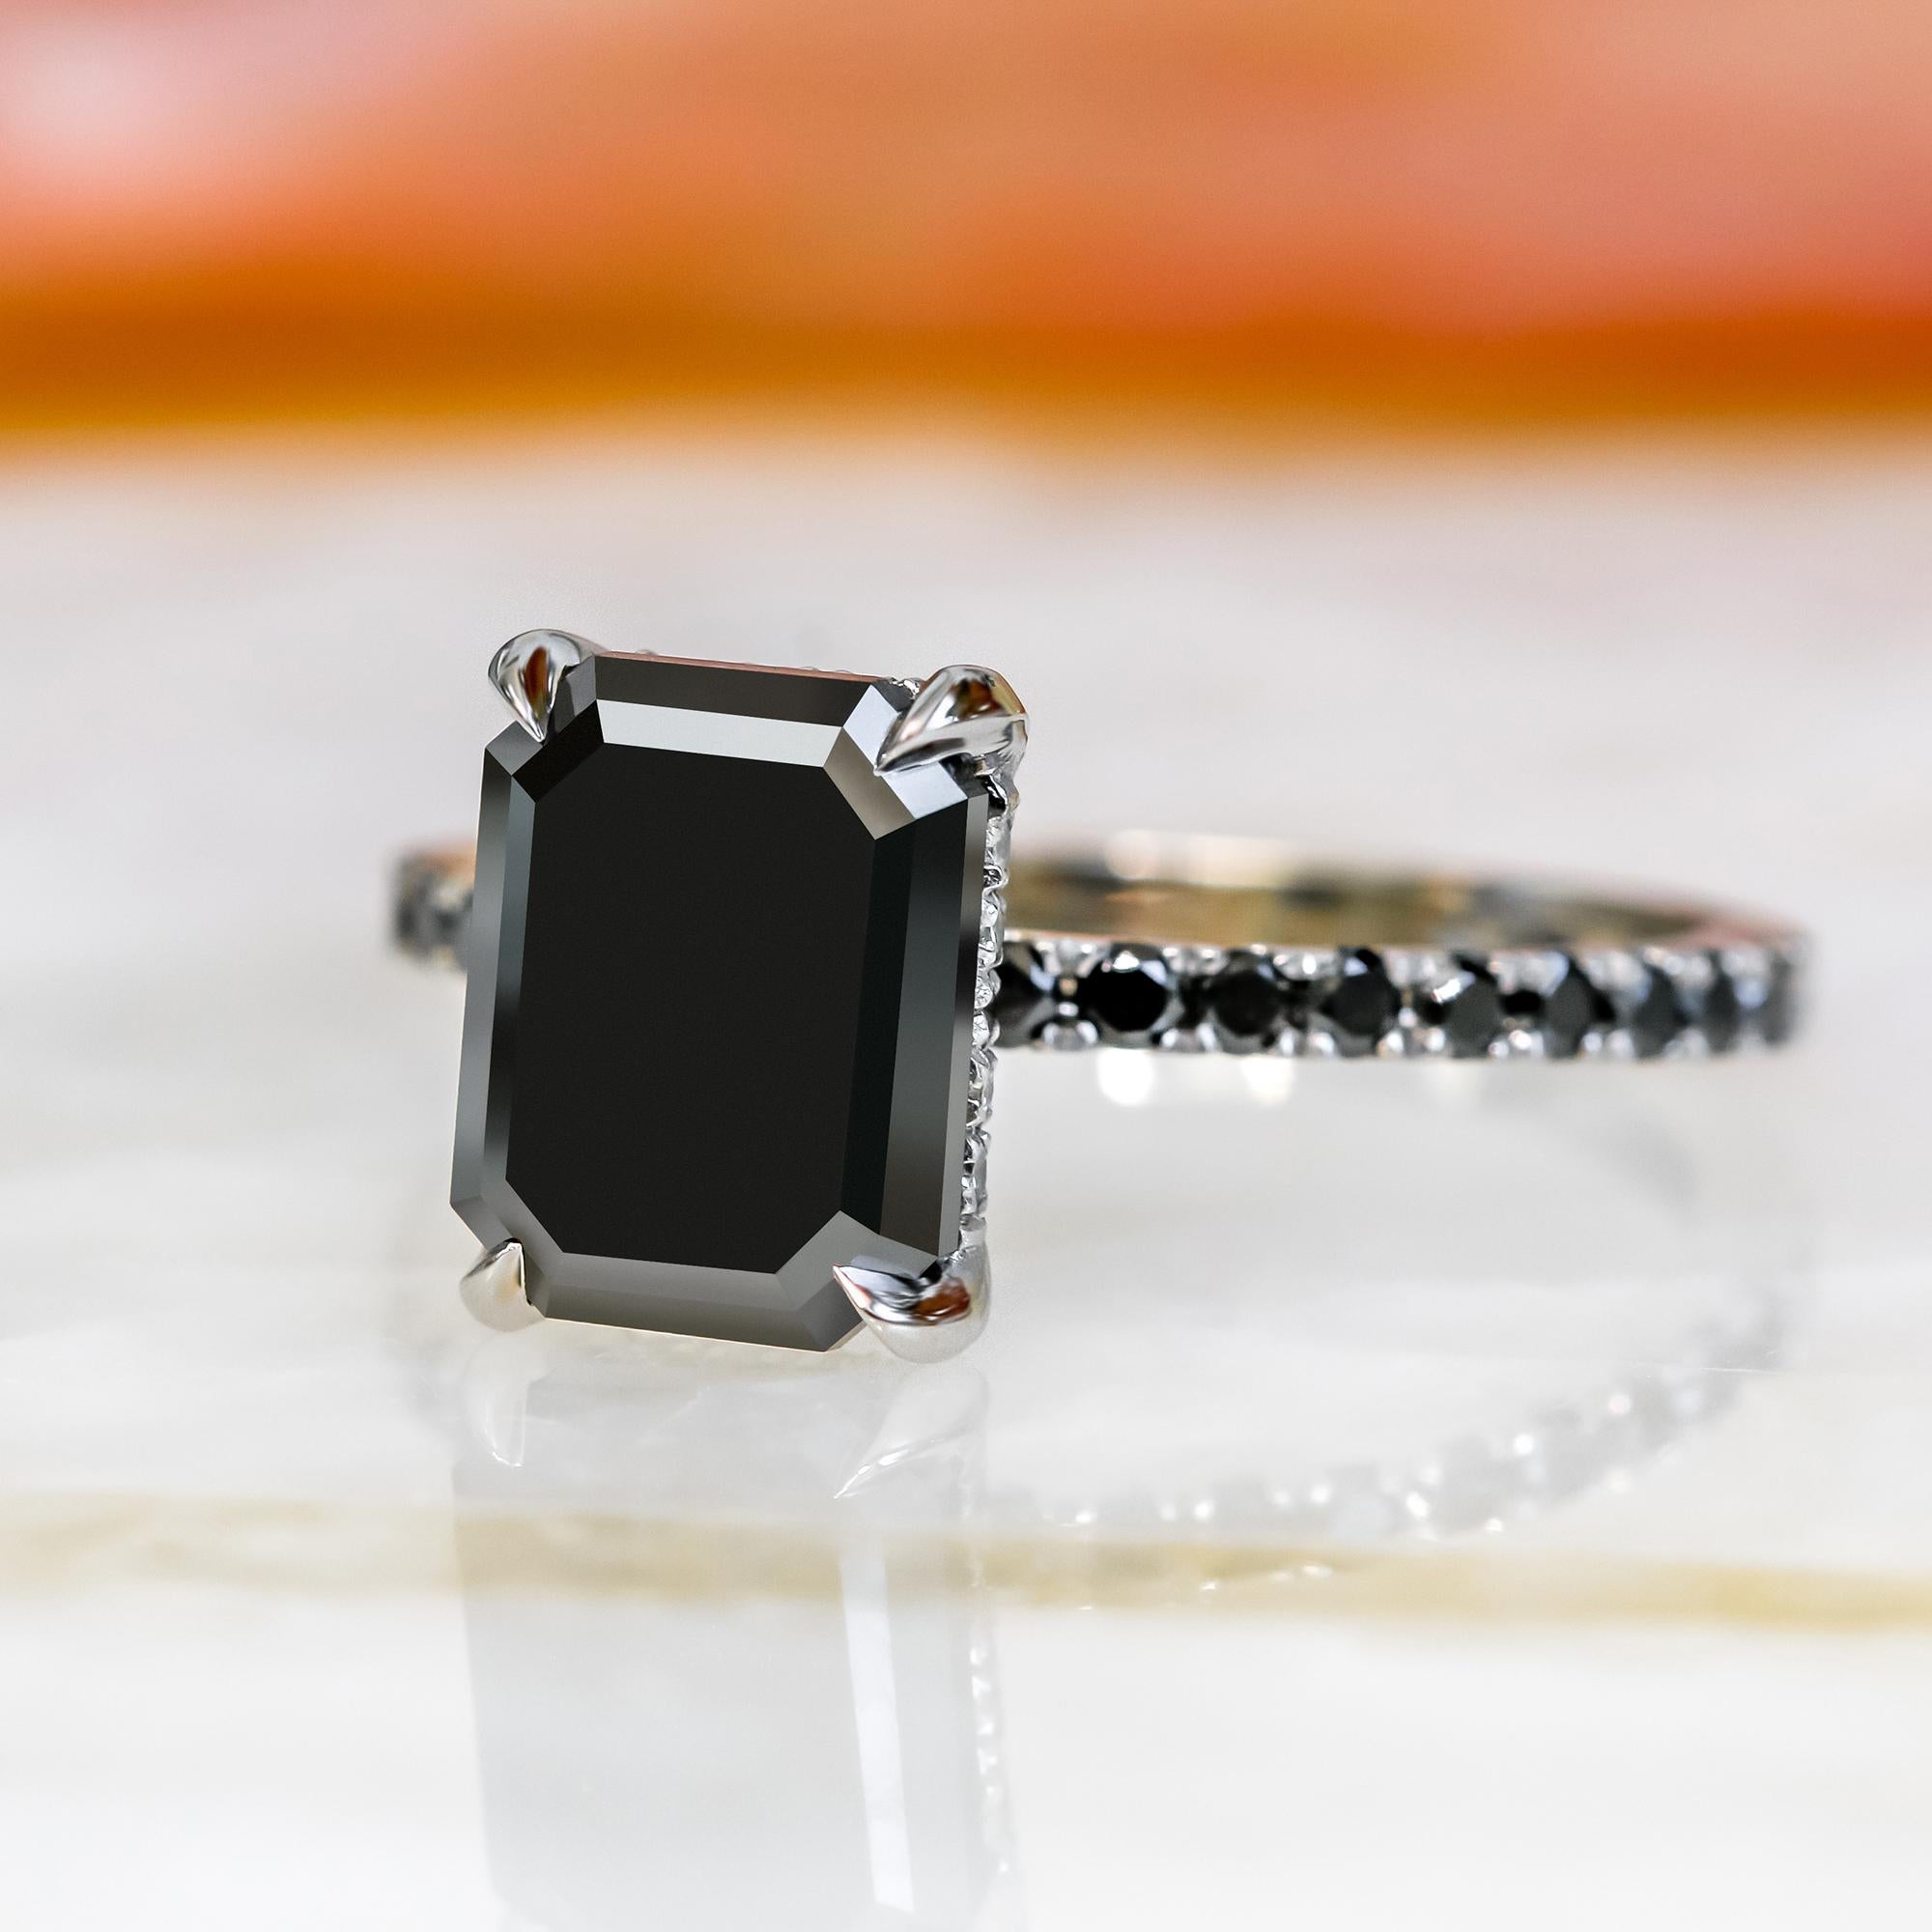 -Total Carat Weight: 3.35 Carats
-14K White Gold
-Size: Resizable

Notes:
- All diamonds are natural, earth-mined diamonds that were suitable for Color Enhancement into Fancy Black color.
- All Jewelry are made to order hence any size and gold